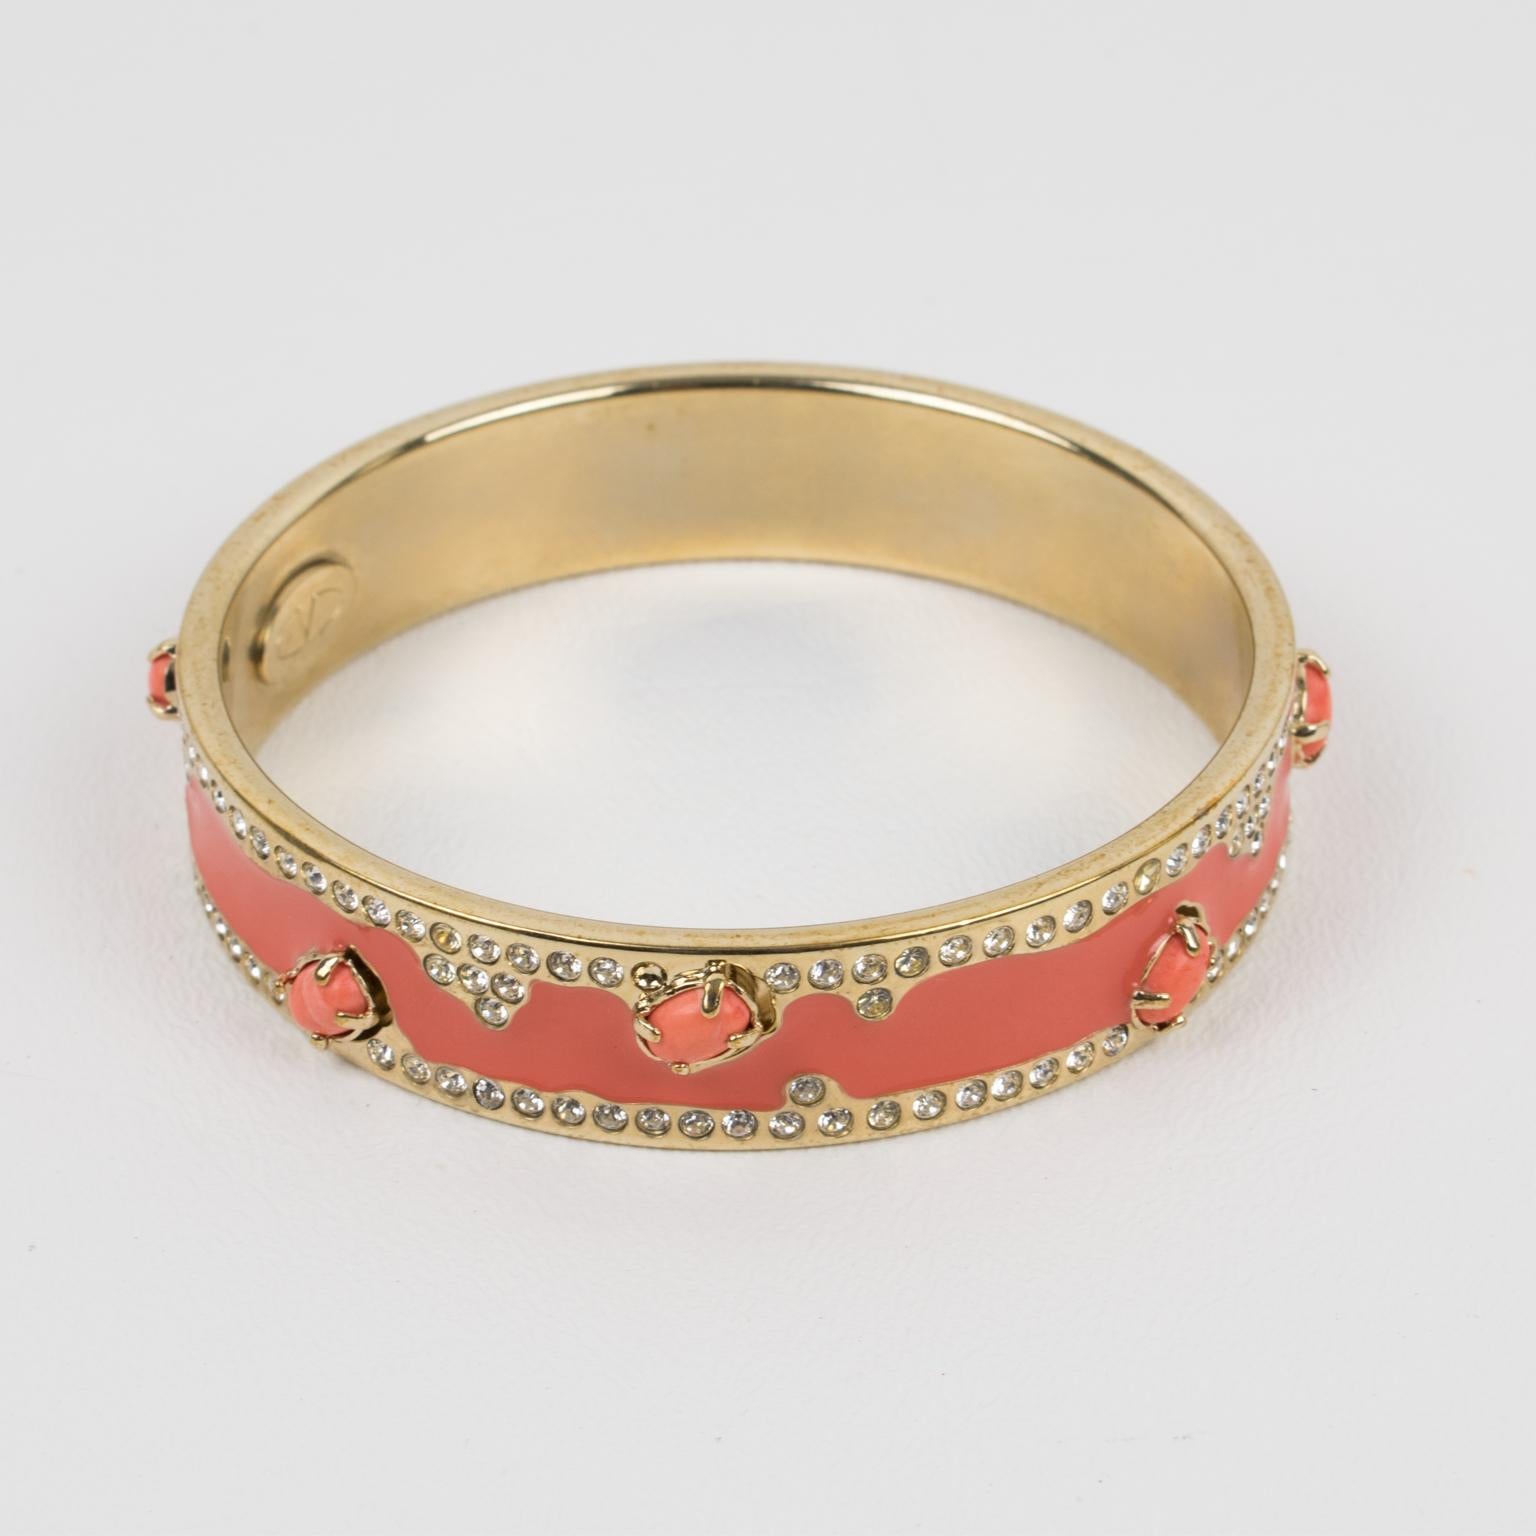 Mesmerizing Valentino Garavani jeweled bracelet bangle. Gilt metal bangle shape ornate with tiny crystal rhinestones and pink-coral enamel. The bracelet is also complimented with poured glass pink coral cabochons. Valentino hallmark ovoid brand logo